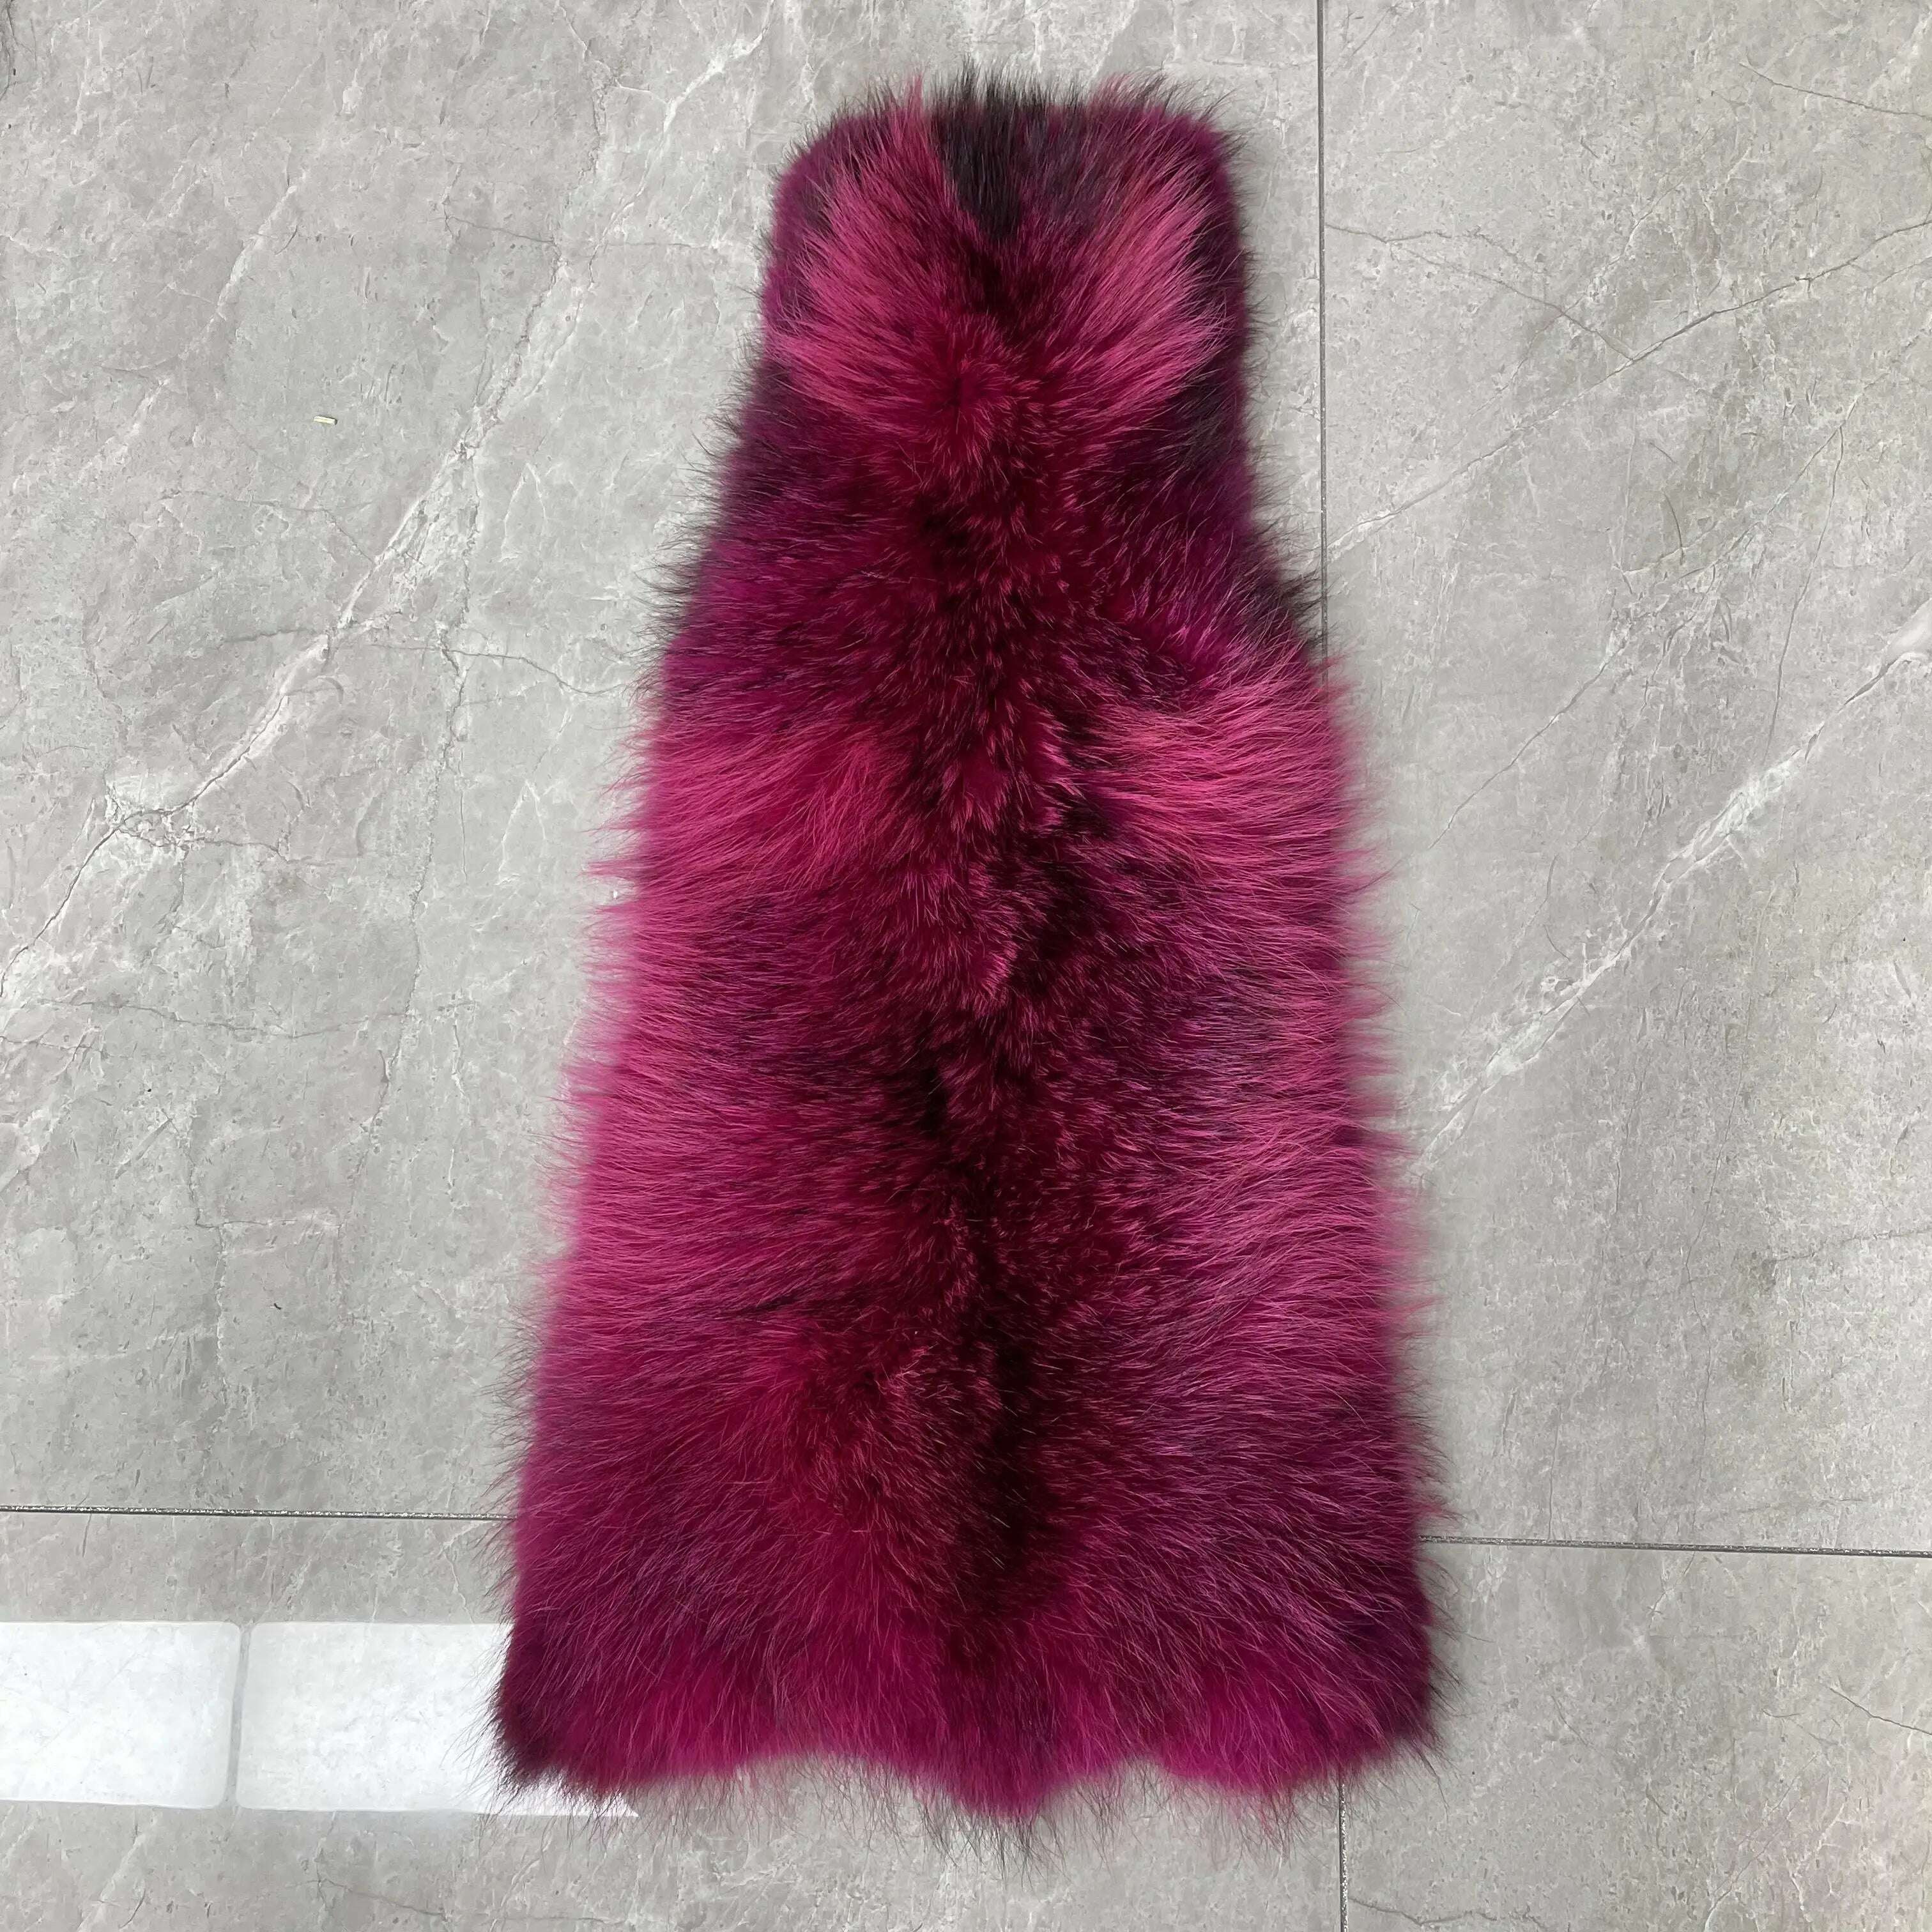 KIMLUD, Men Clothes Golden Island White Special Fox Fur Coat Full Pelt Customized Size Available, Hot Pink / XS(88cm), KIMLUD Womens Clothes